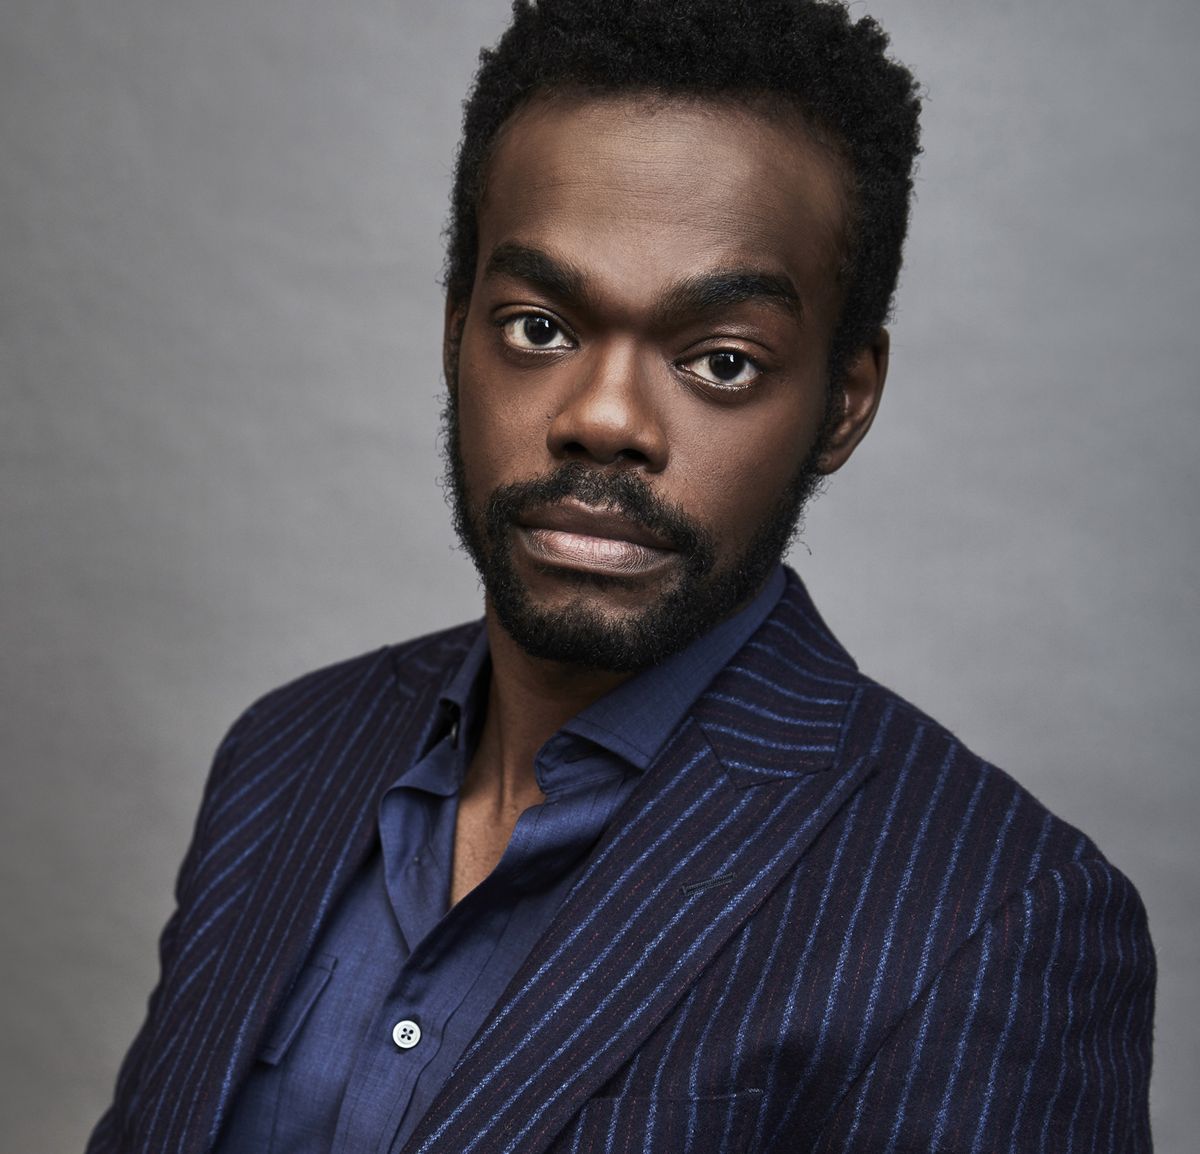 nbcuniversal events     january 2020 press tour portrait studio    pictured william jackson harper, the good place    photo by maarten de boernbcuniversalnbcu photo bank via getty images